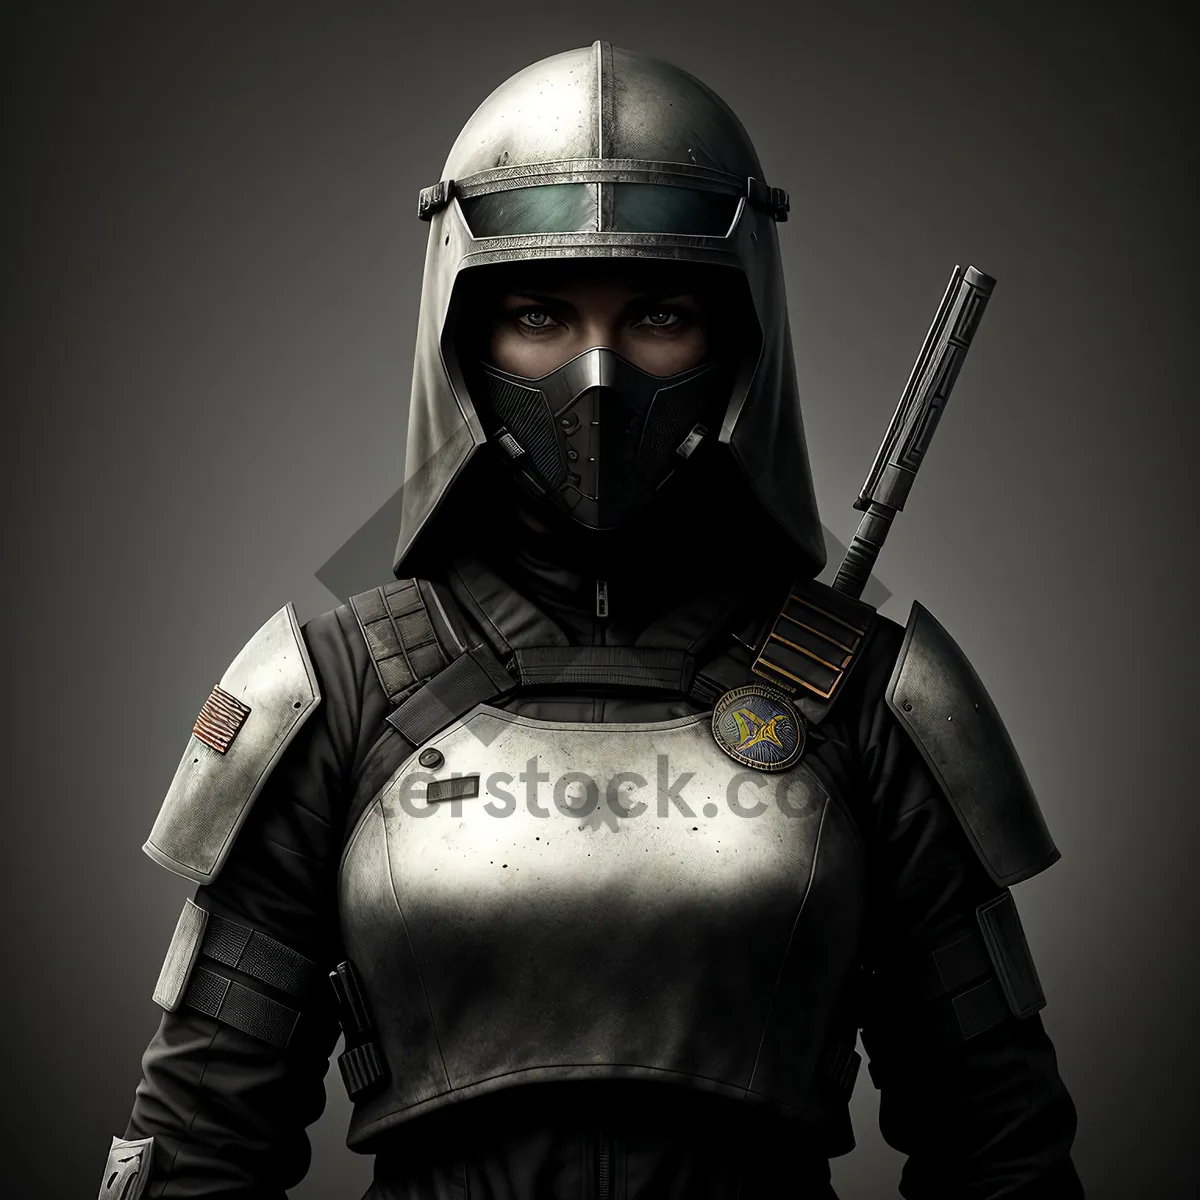 Picture of Warrior in Protective Armor: Militia Soldier Ready for Battle